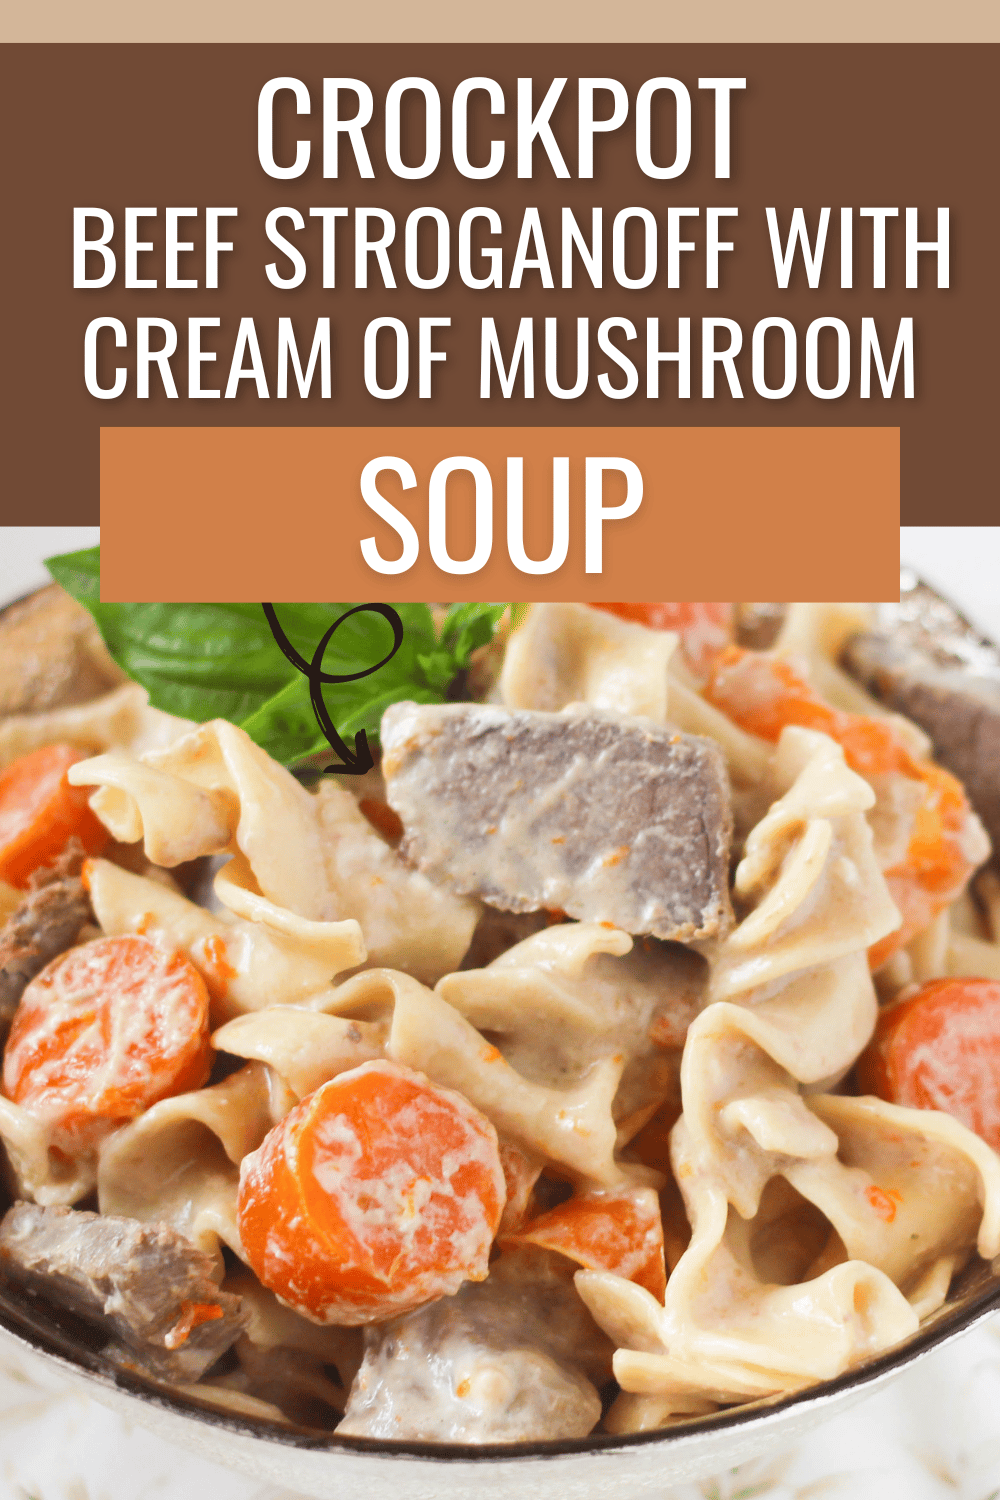 This beef stroganoff with mushroom cream is an easy and delicious weekday meal that the whole family will love! #crockpotstroganoff #beefstroganoffrecipe #beefstroganoff #creamofmushroomsoup via @wondermomwannab